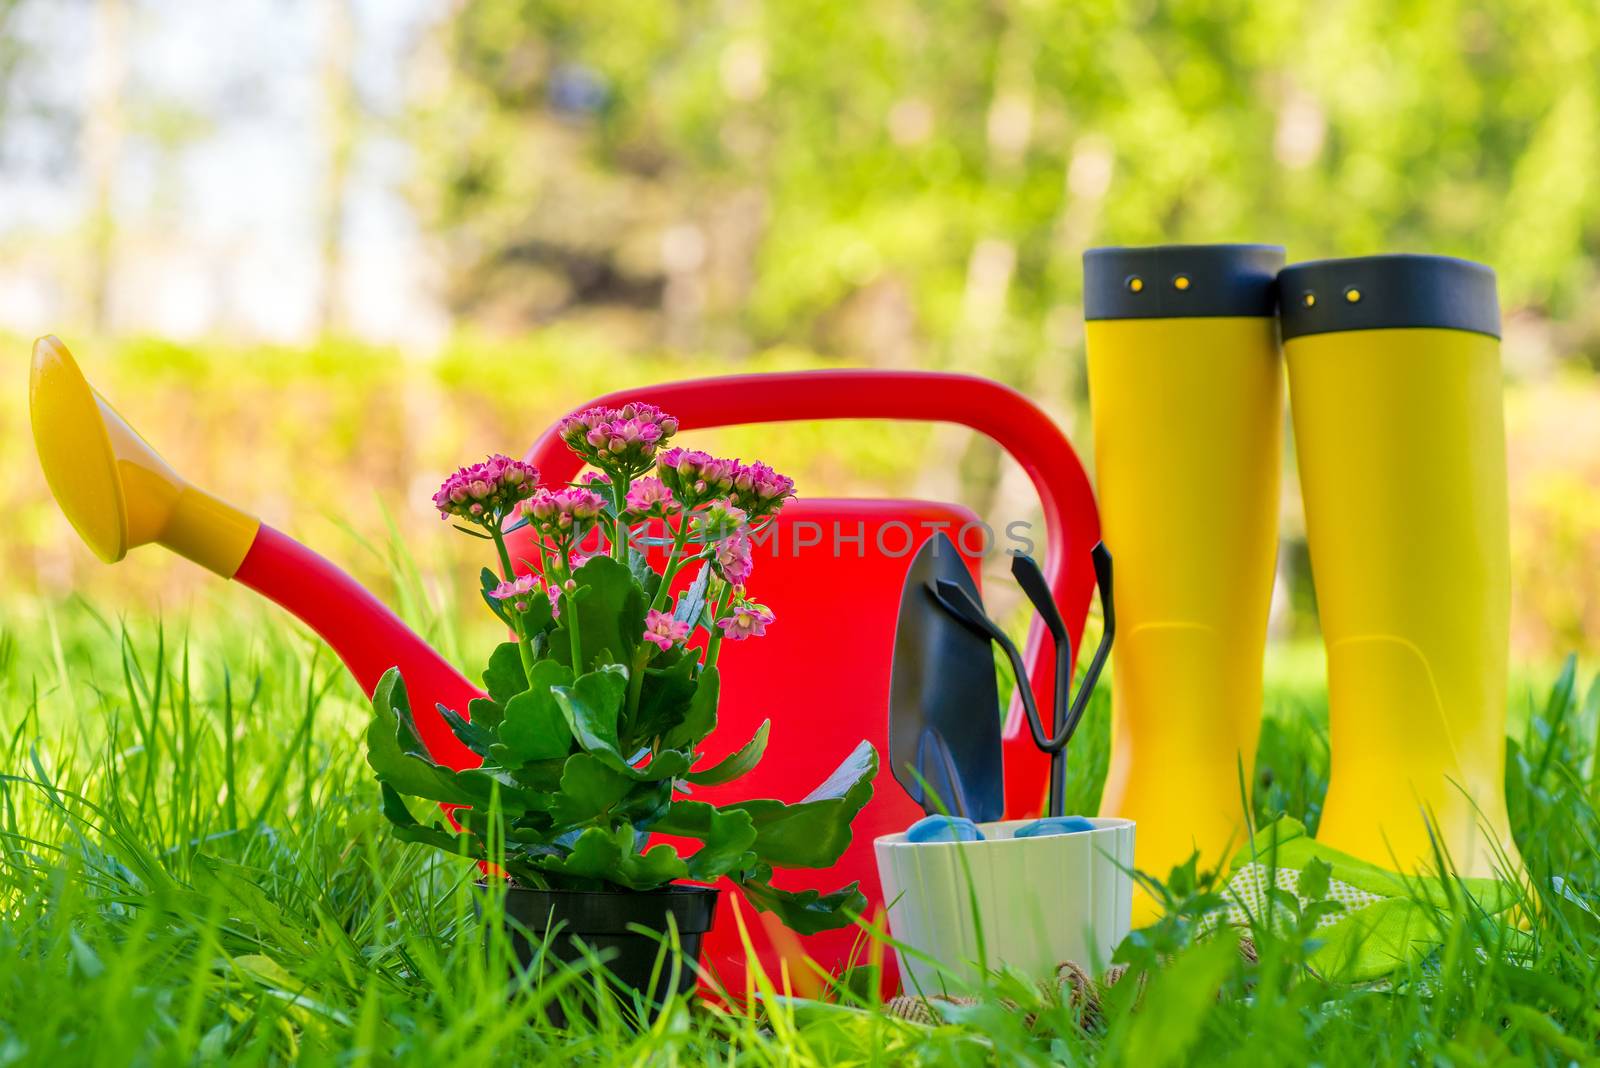 rubber boots, watering can and gardener's tools for working in the garden on green succulent grass